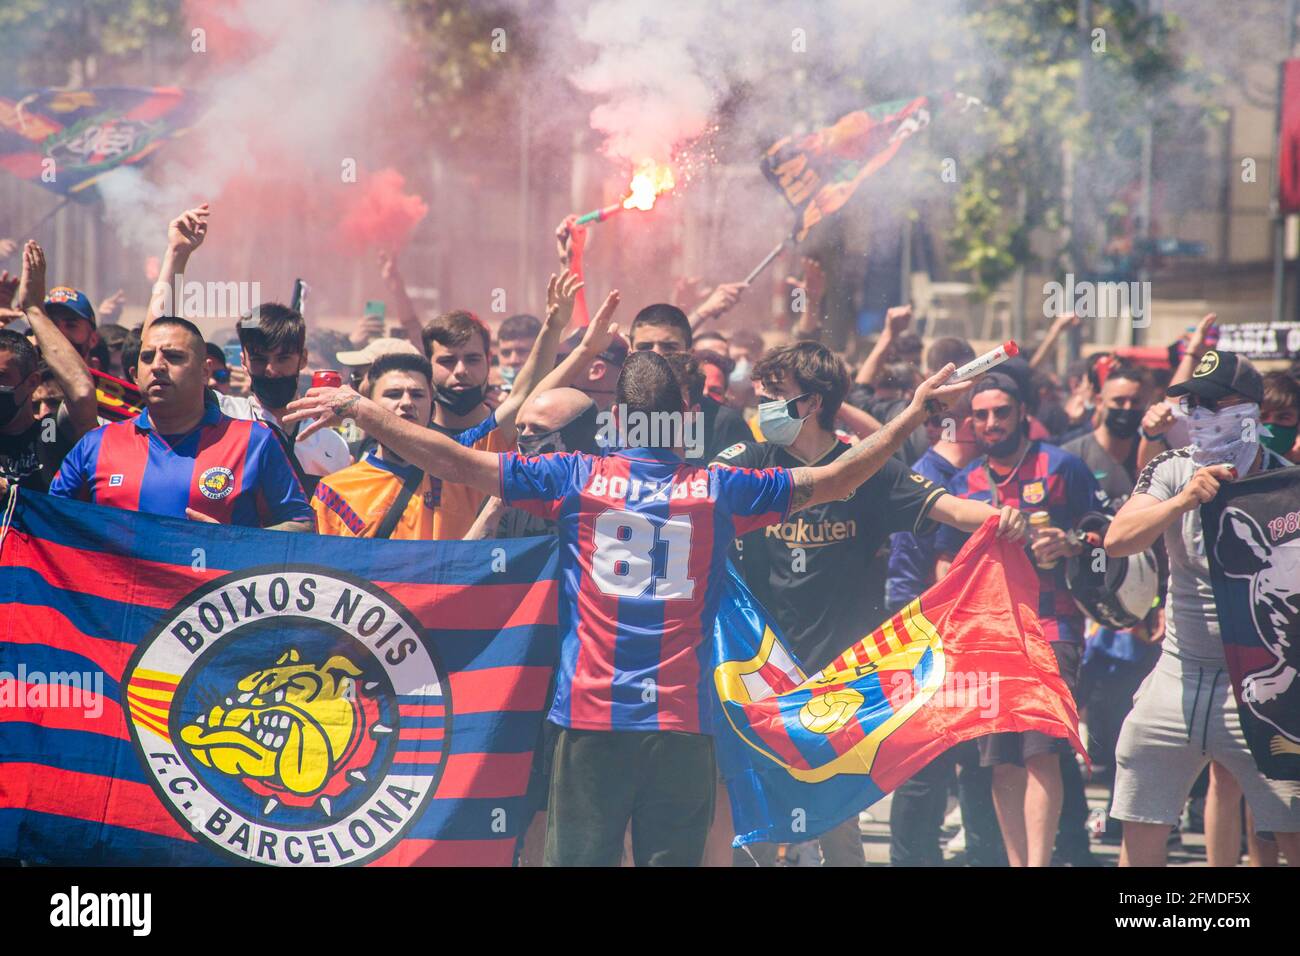 Football Club Barcelona fans are seen holding flags and burning flares The  ultras supporter group of Football Club Barcelona, Boixos Nois (Crazy Boys)  have gathered outside the Camp Nou stadium to motivate